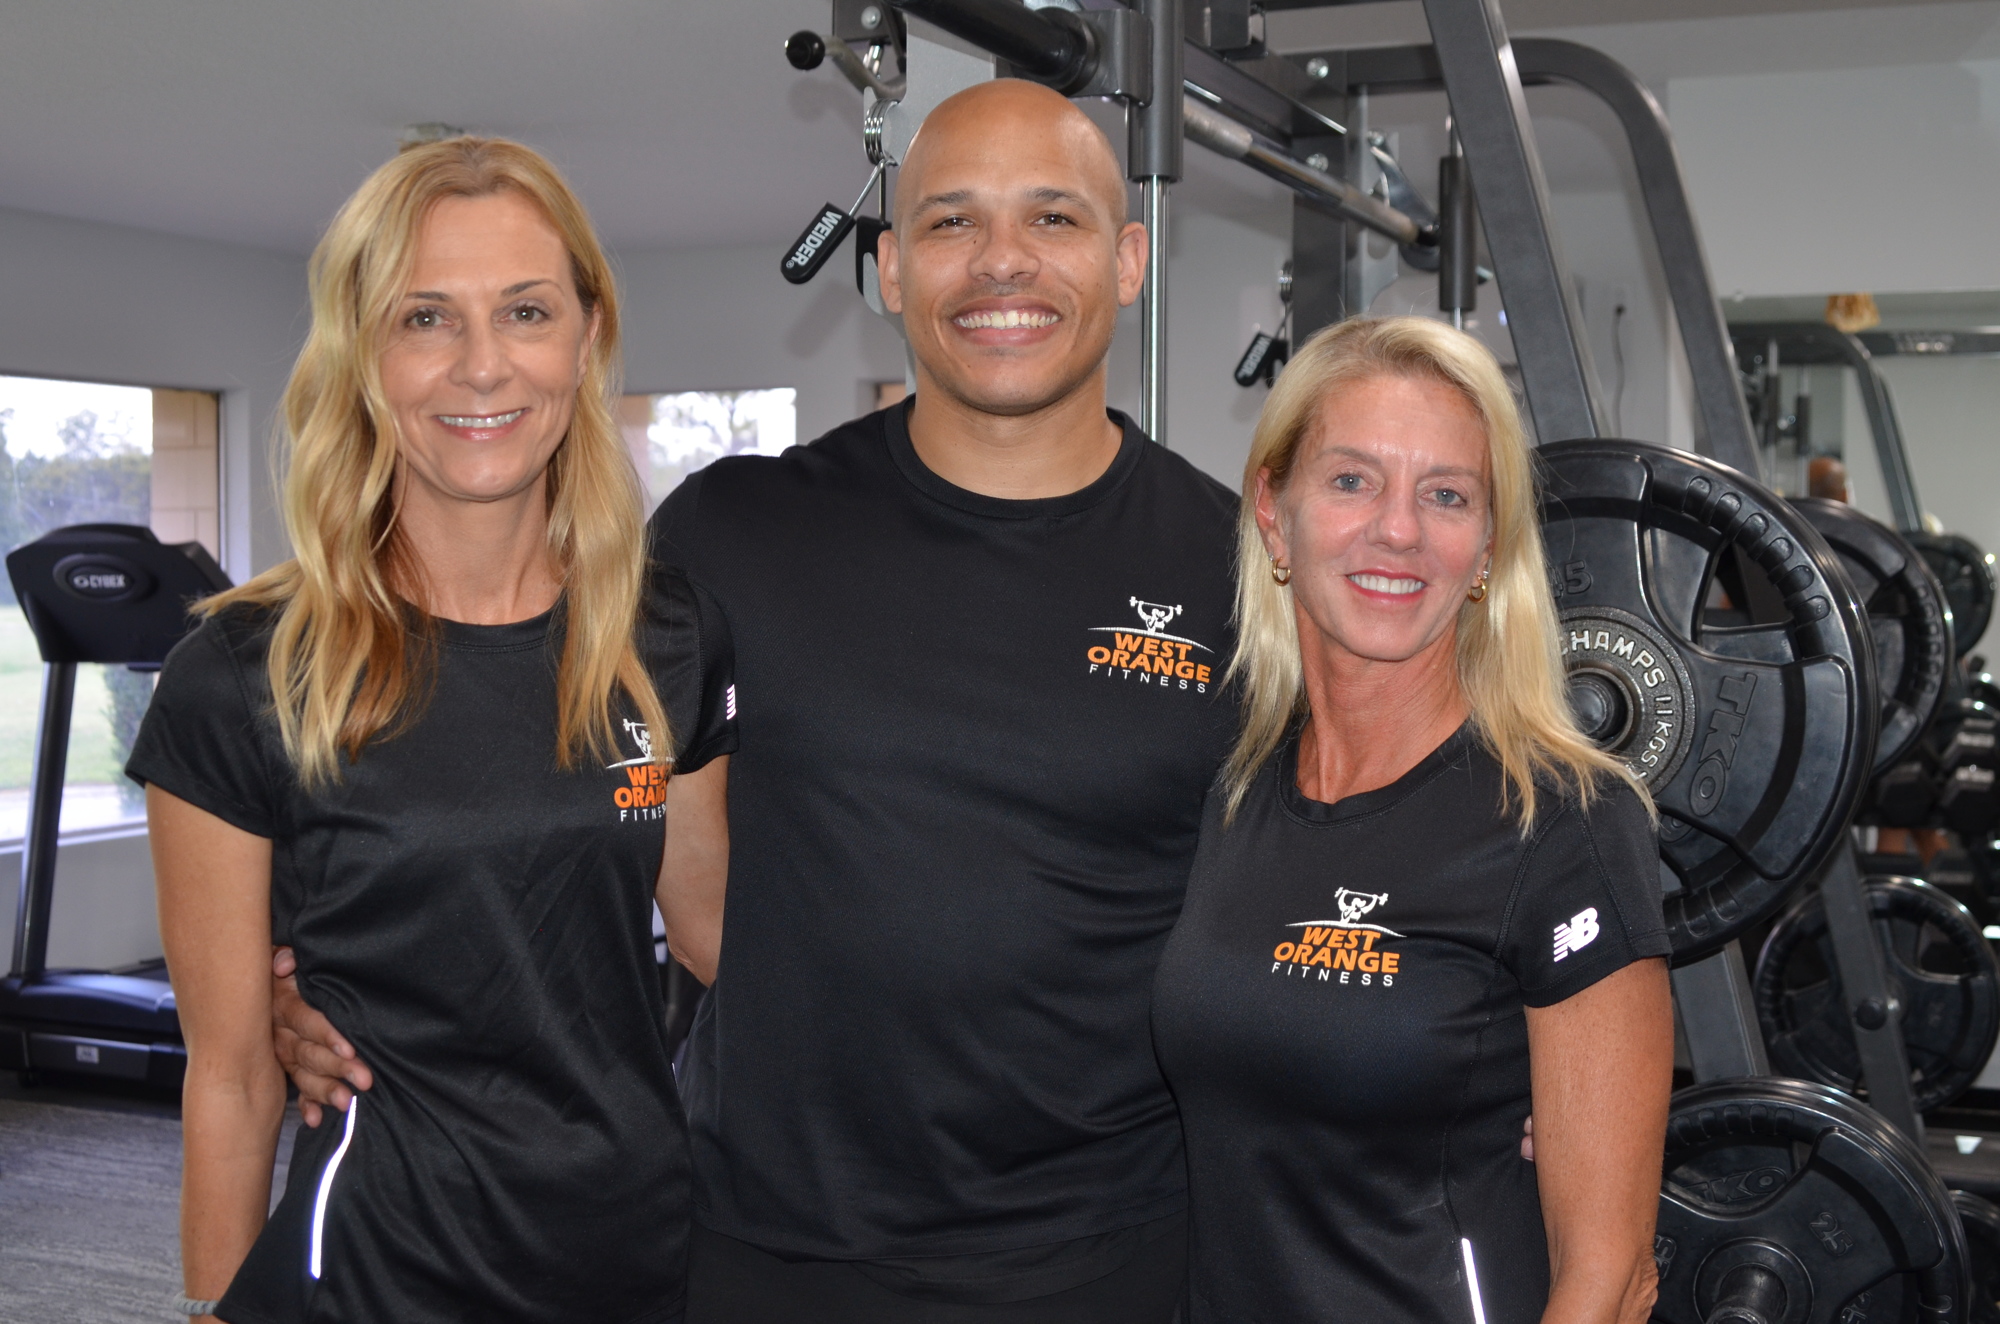 West Orange Fitness owner Gina Denison, right, with Penny Dittbrenner and Brandon Strong, offer personal training at her new gym at the West Orange Country Club.